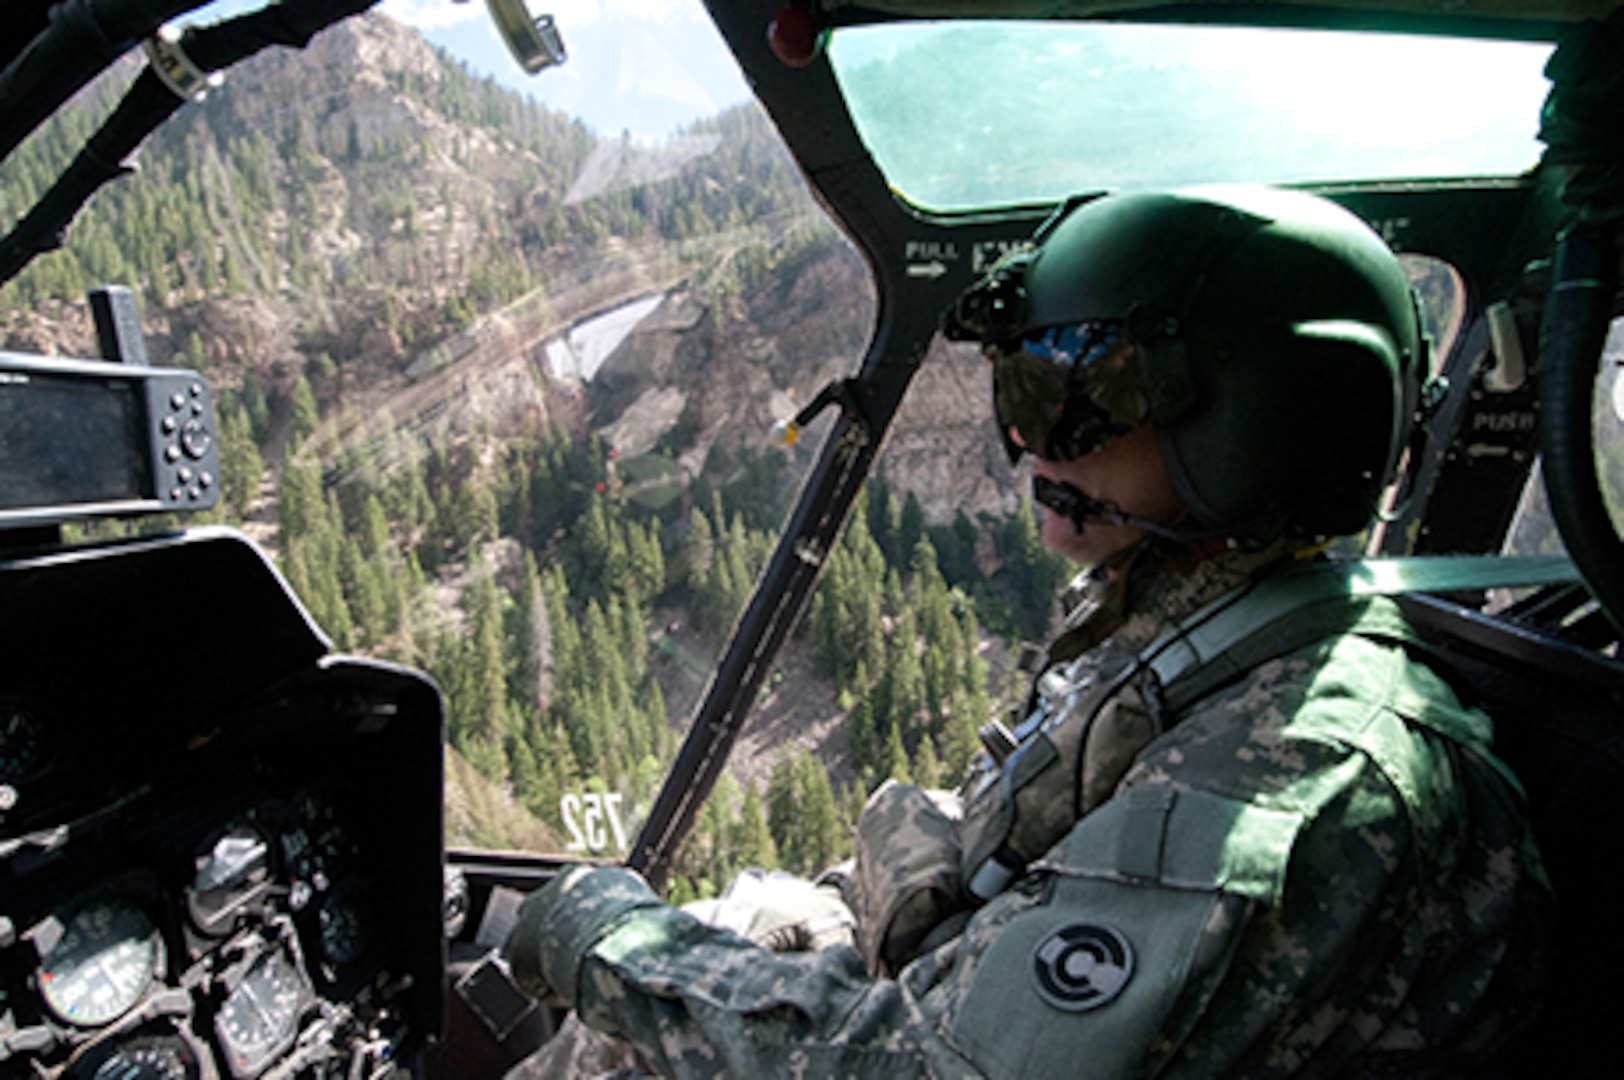 Colorado Army National Guard Maj. Tony Somogyi pilots his OH-58 Kiowa helicopter above the Rocky Mountains, Aug. 23, 2011. Somogyi is the executive officer of the COARNG’s High-altitude Army National Guard Aviation Training Site in Gypsum, Colo. Somogyi has extensive experience as a scout and as a search-and-rescue/search-and-recovery pilot. (Photo © 2011 Deborah Grigsby Illustrative Photography/Used with permission)